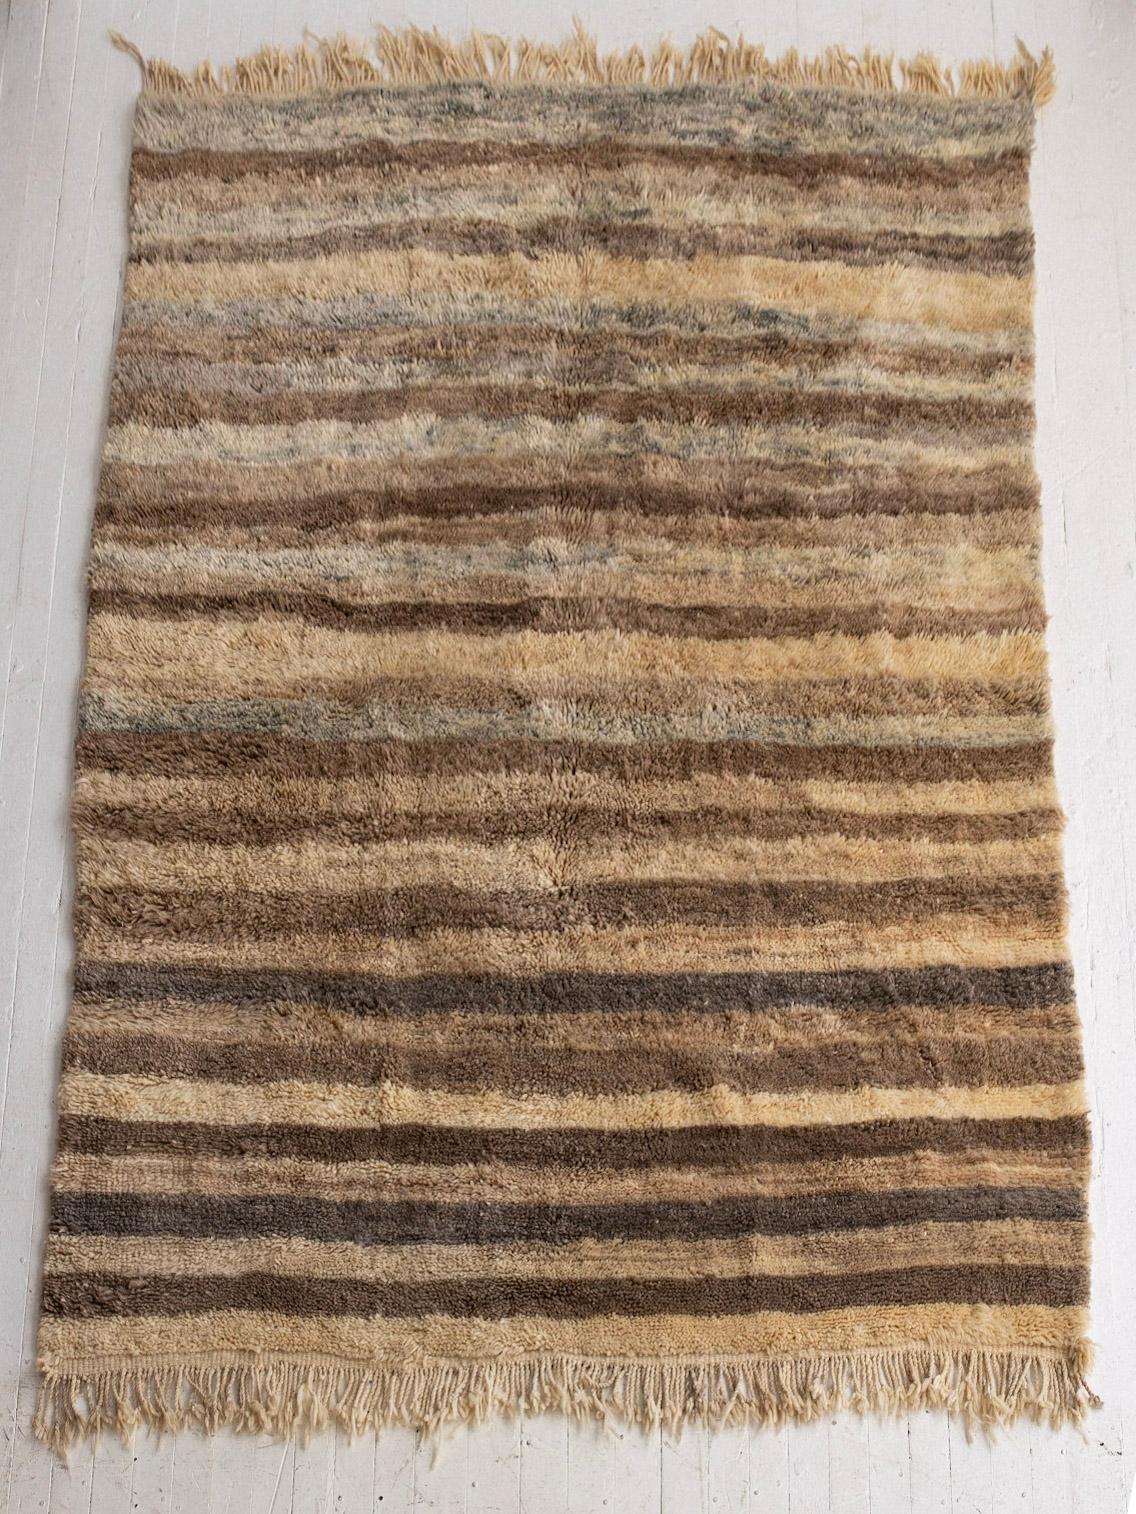 Extra soft high pile Moroccan wool rug. Neutral pallet with shades ranging from browns to beiges and grays.